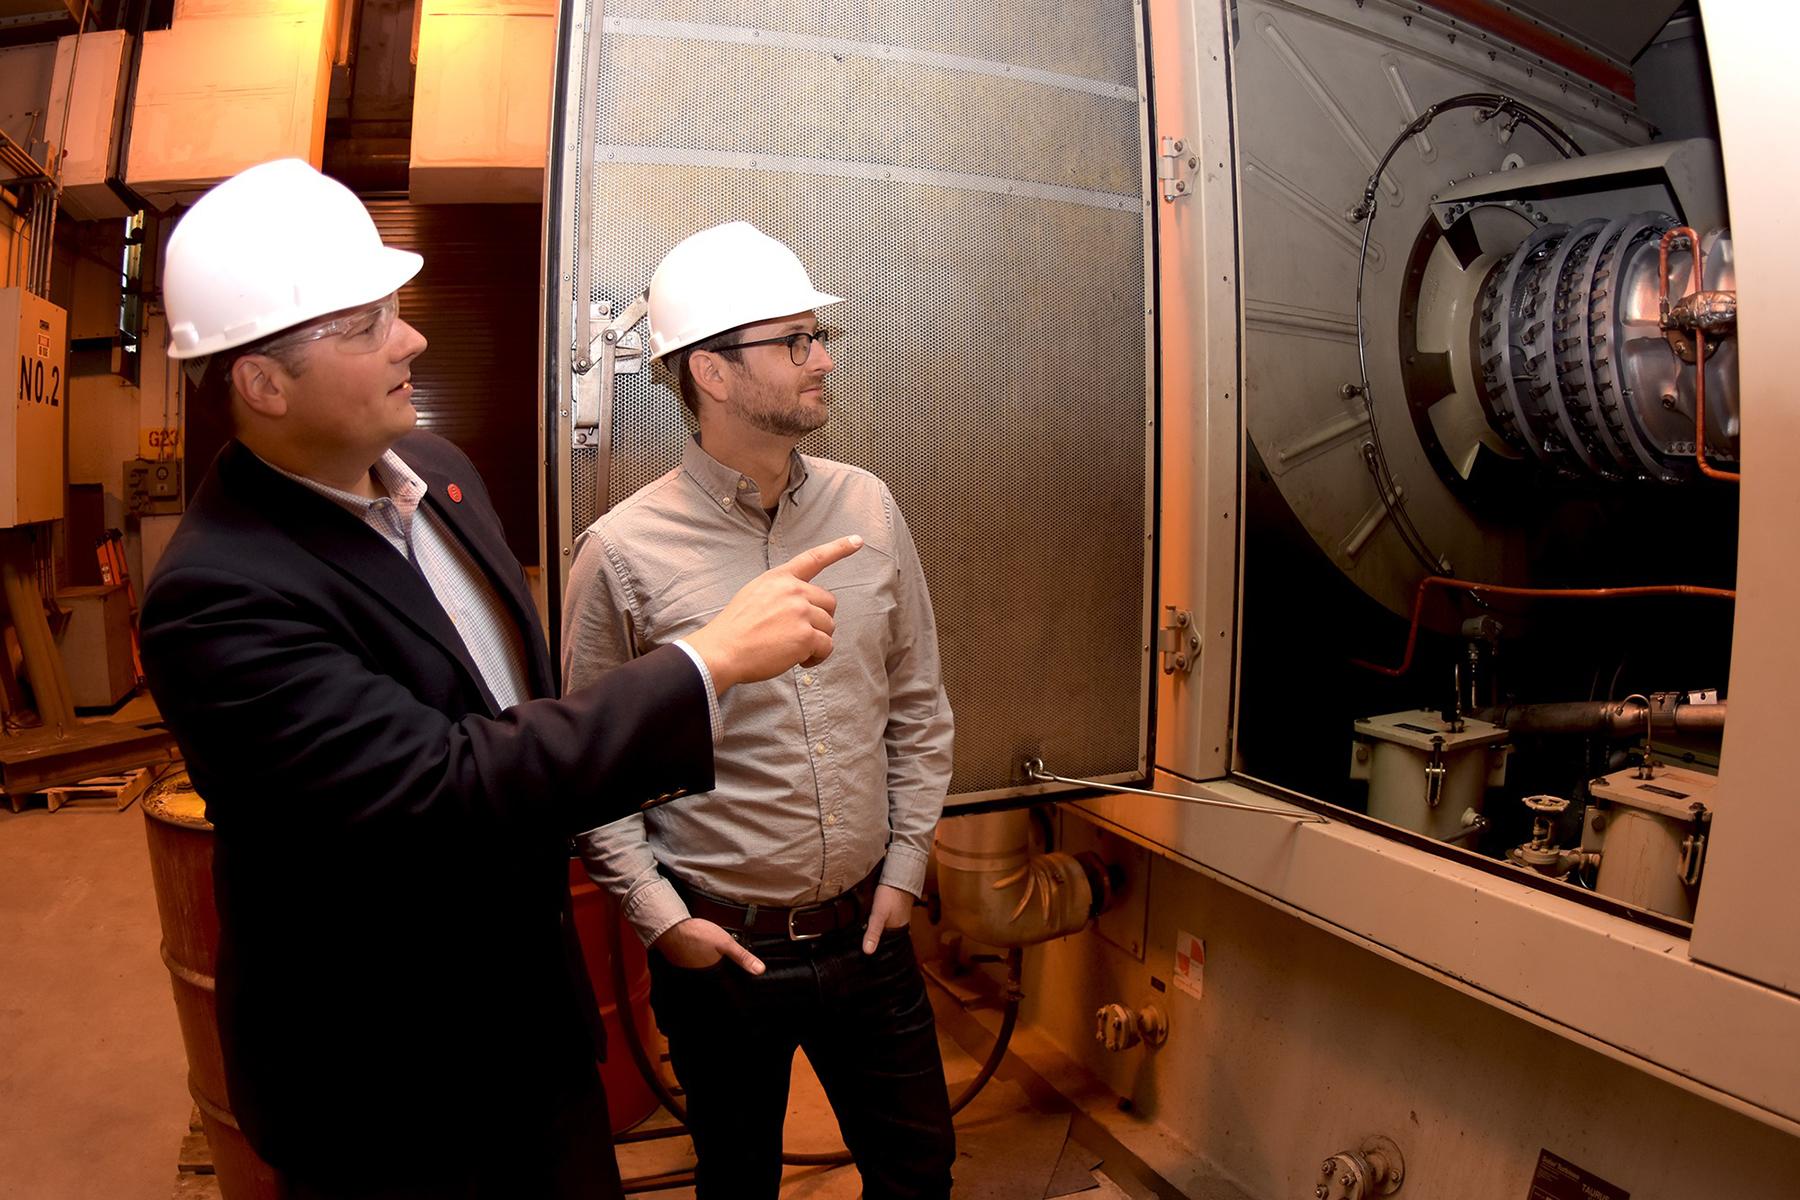 Cliff Haefke, director of the UIC Energy Resources Center, left, and policy analyst Graeme Miller analyze the 7-megawatt combined heat and power combustion turbine at the UIC West Campus Utilities Plant. (Courtesy University of Illinois at Chicago)